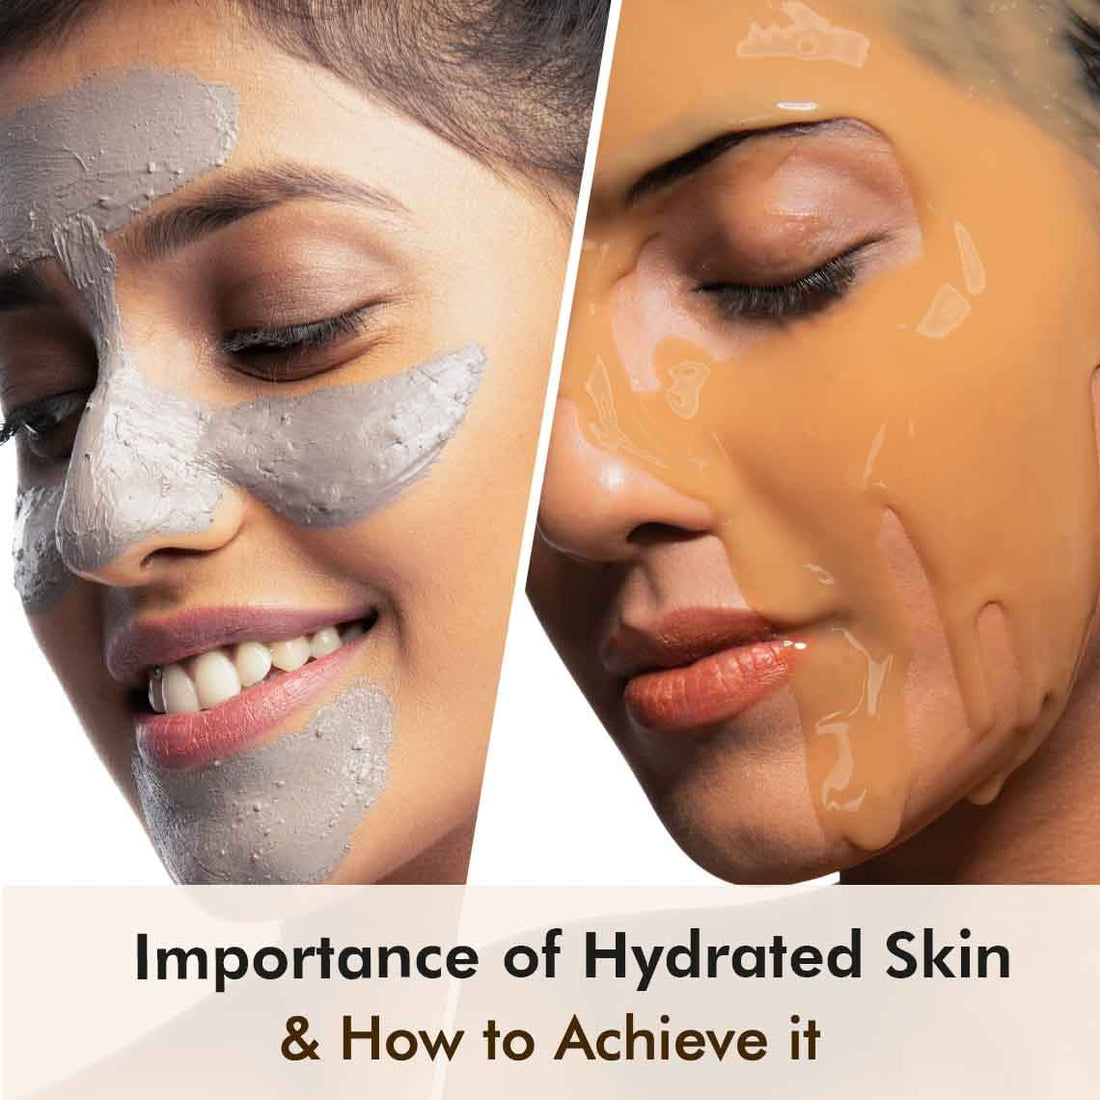 Importance of Hydrated Skin & How to Achieve it